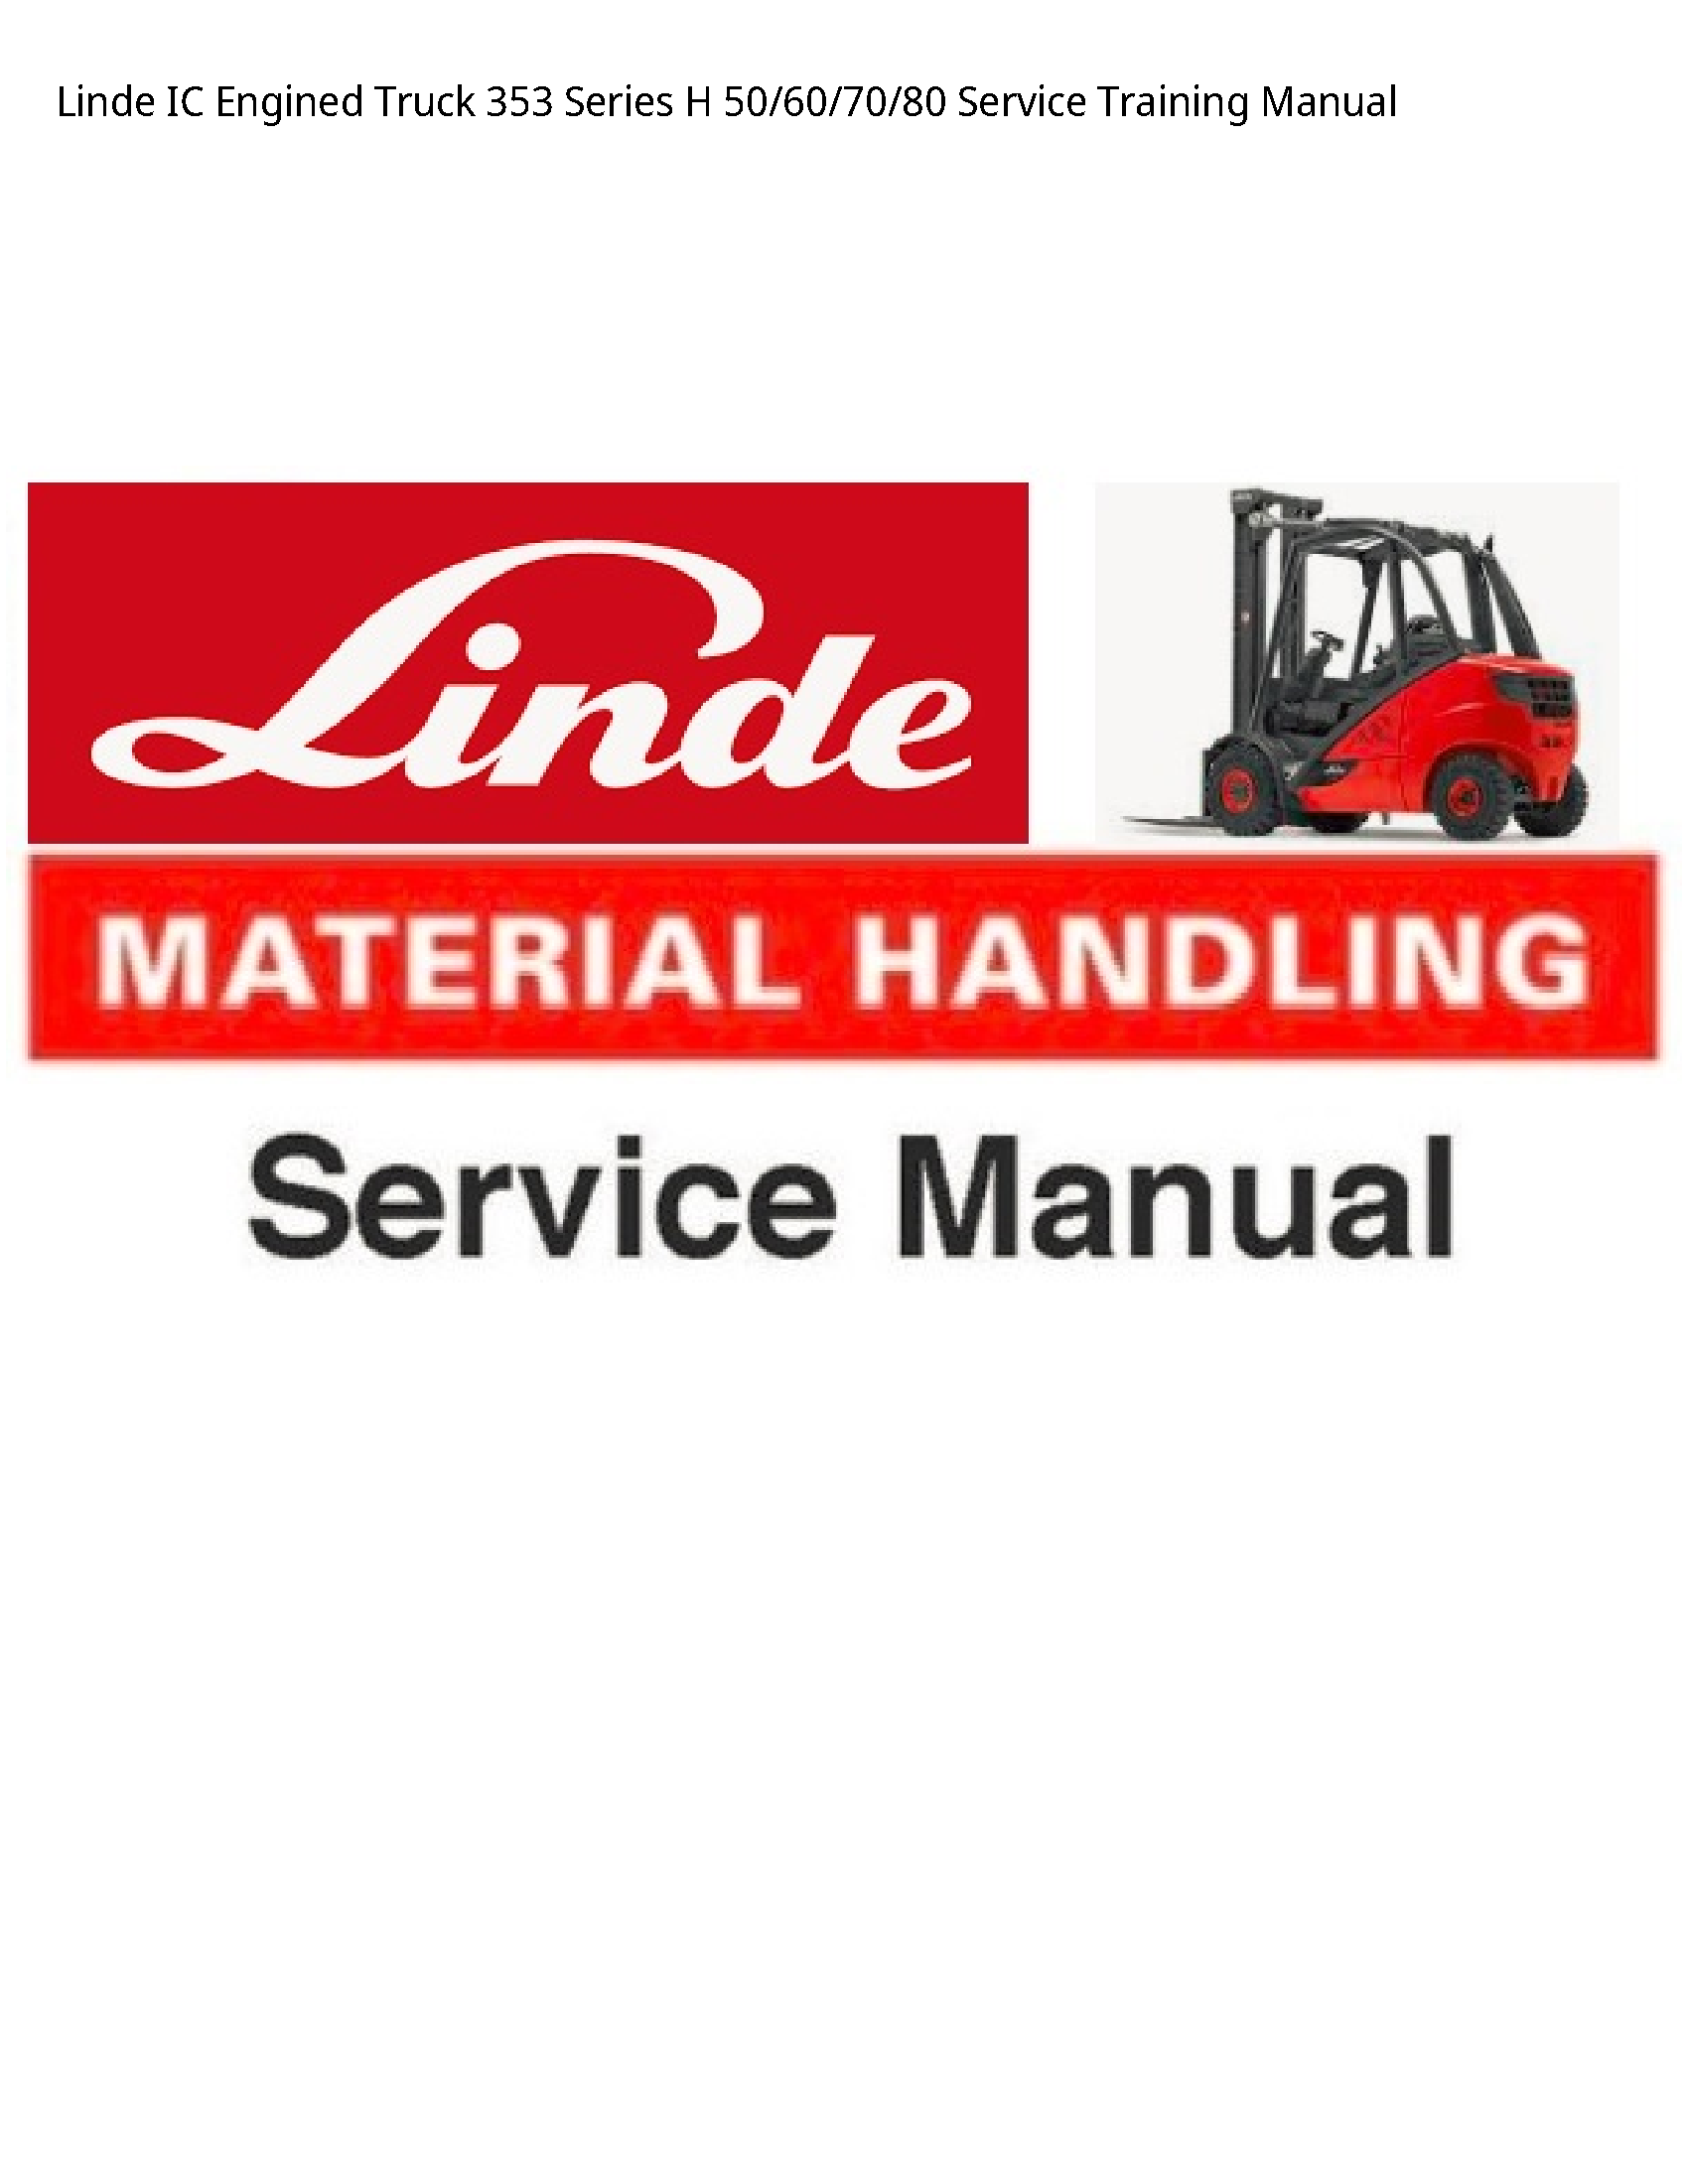 Linde 353 IC Engined Truck Series Service Training manual